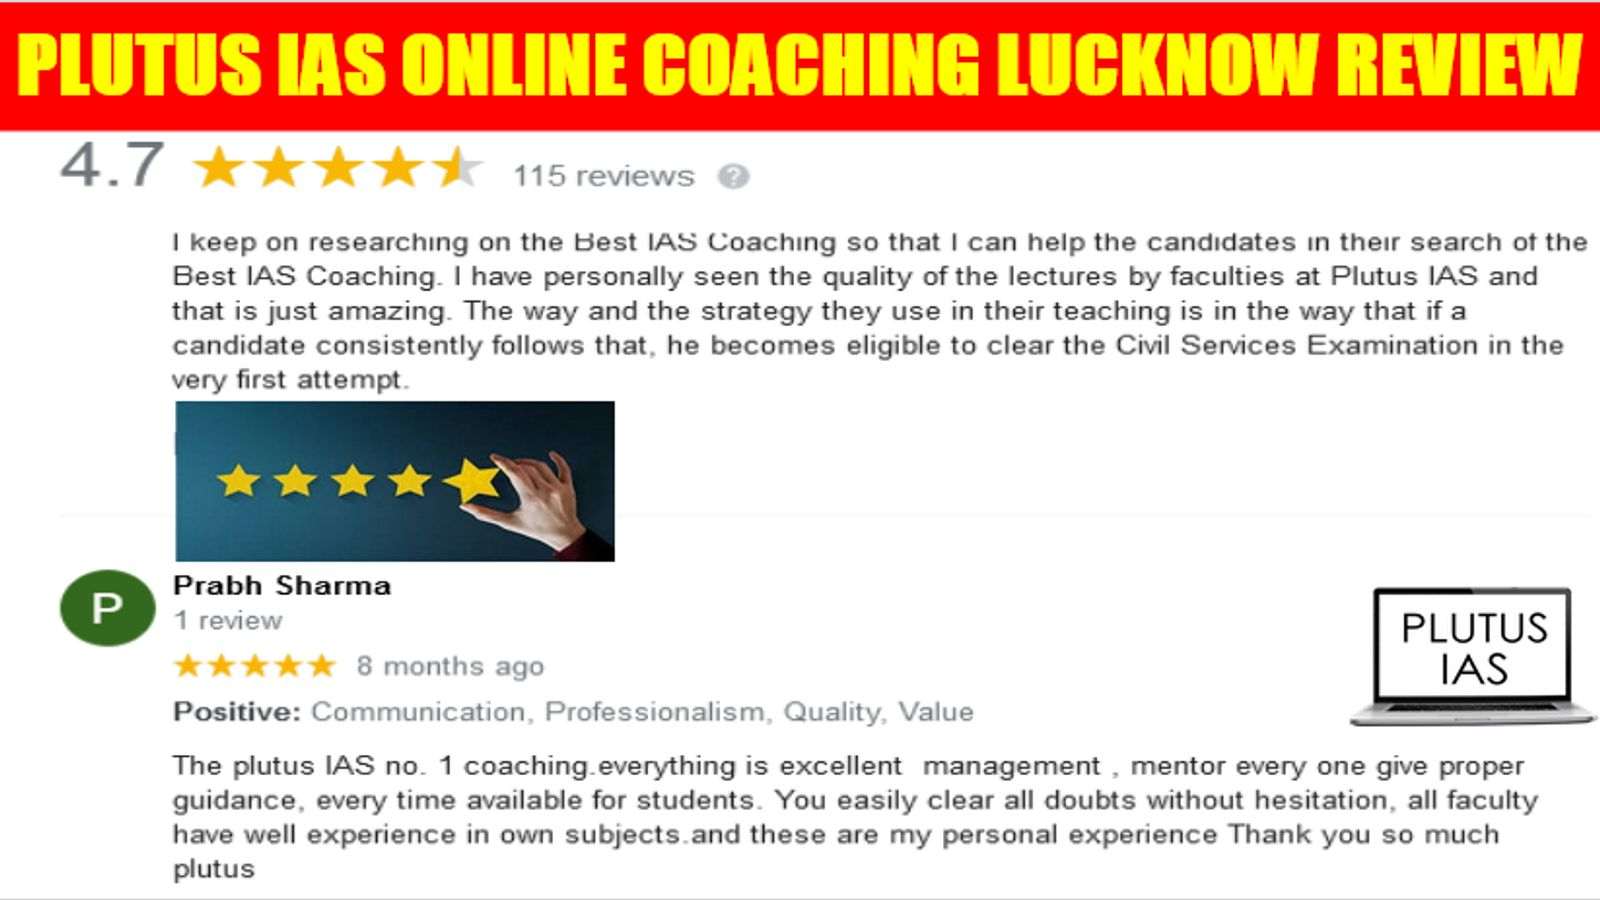 Plutus IAS Online Coaching Lucknow Review